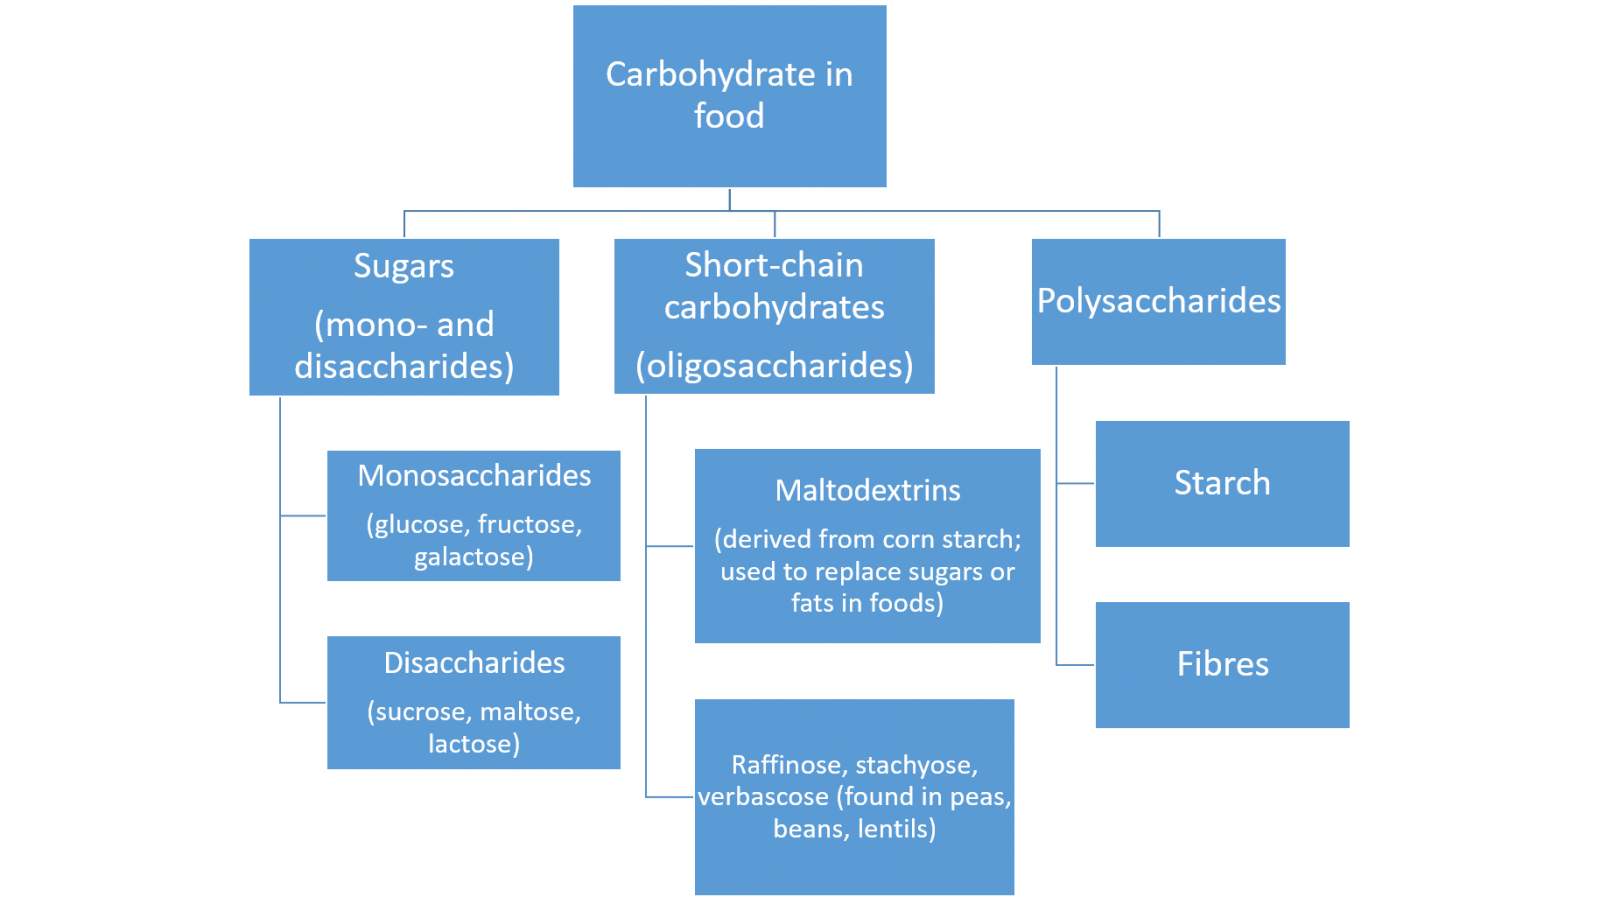 Carbohydrates include sugars, starches, oligosaccharides, and fibres